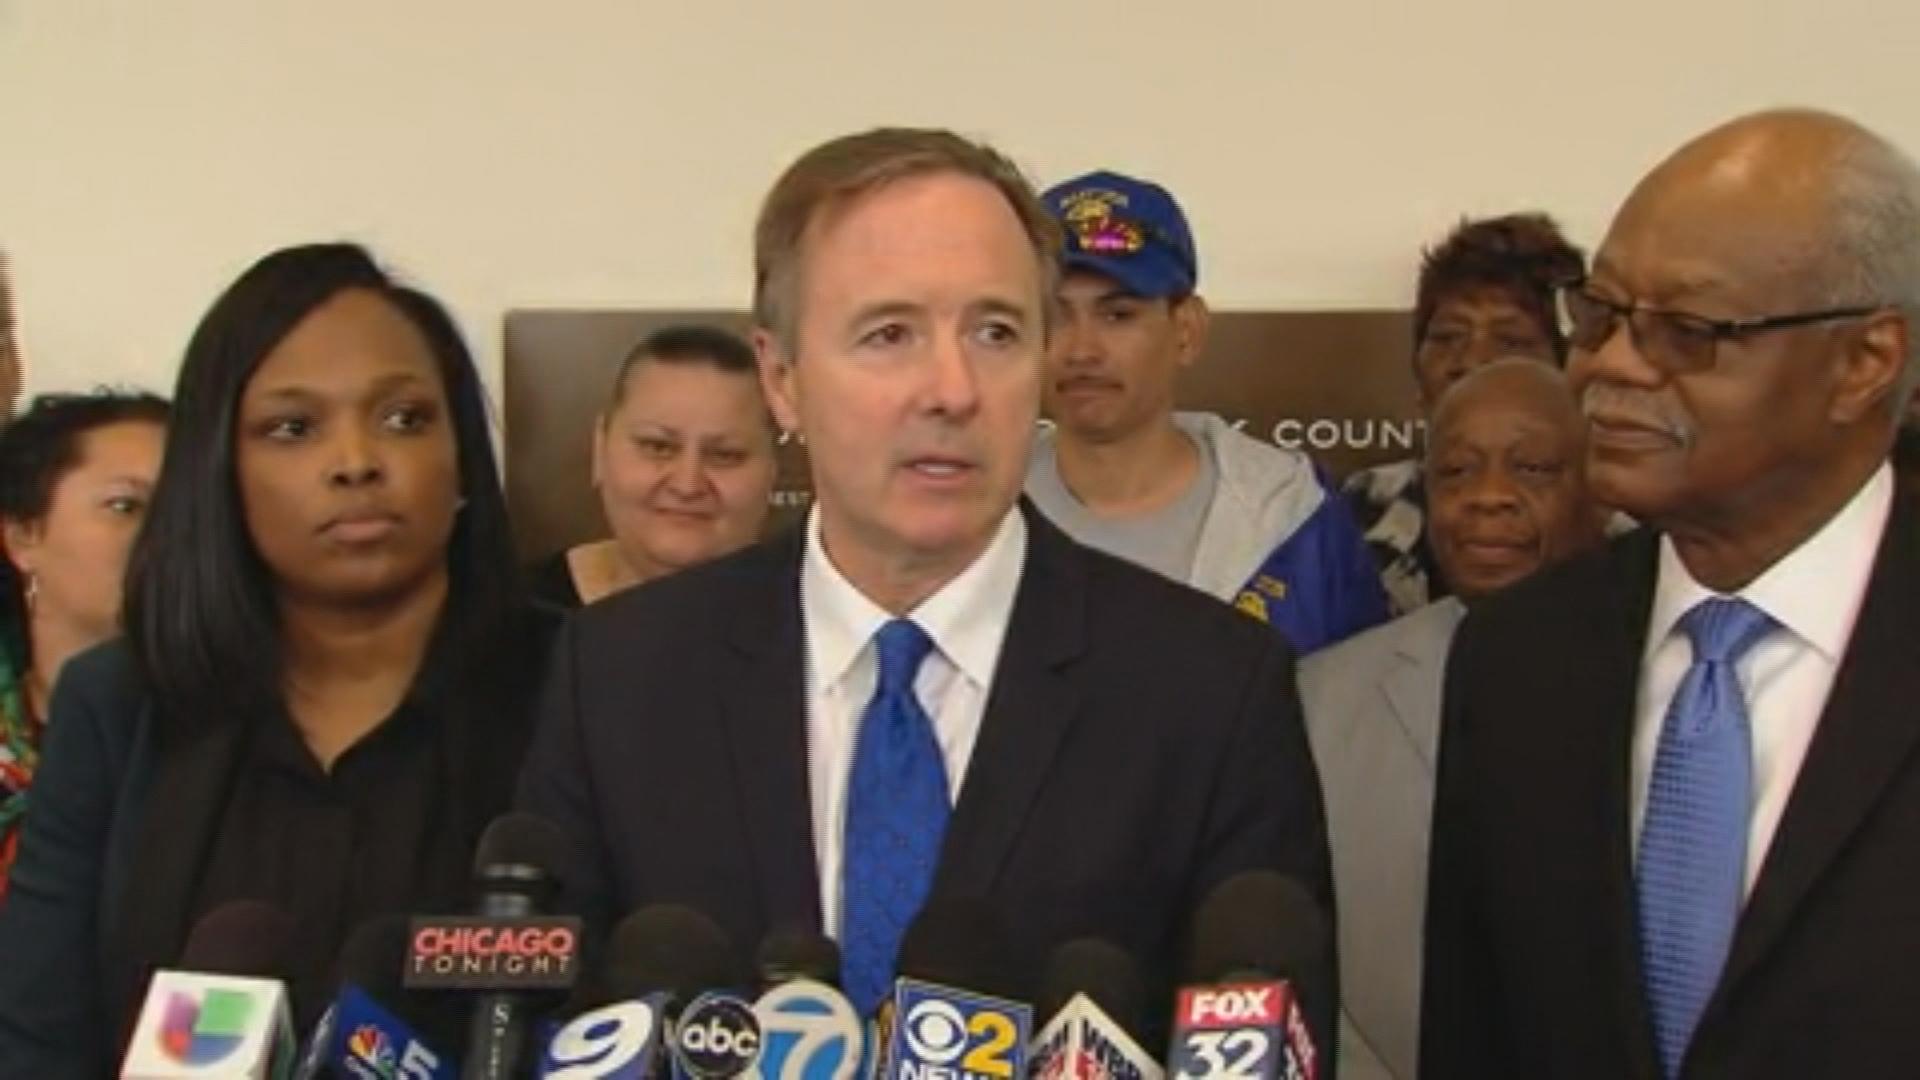 “Obviously we’re very disappointed in the judge’s ruling that it is permissible for the state of Illinois to discriminate on the basis of race,” said CPS CEO Forrest Claypool on Friday. (Chicago Tonight)